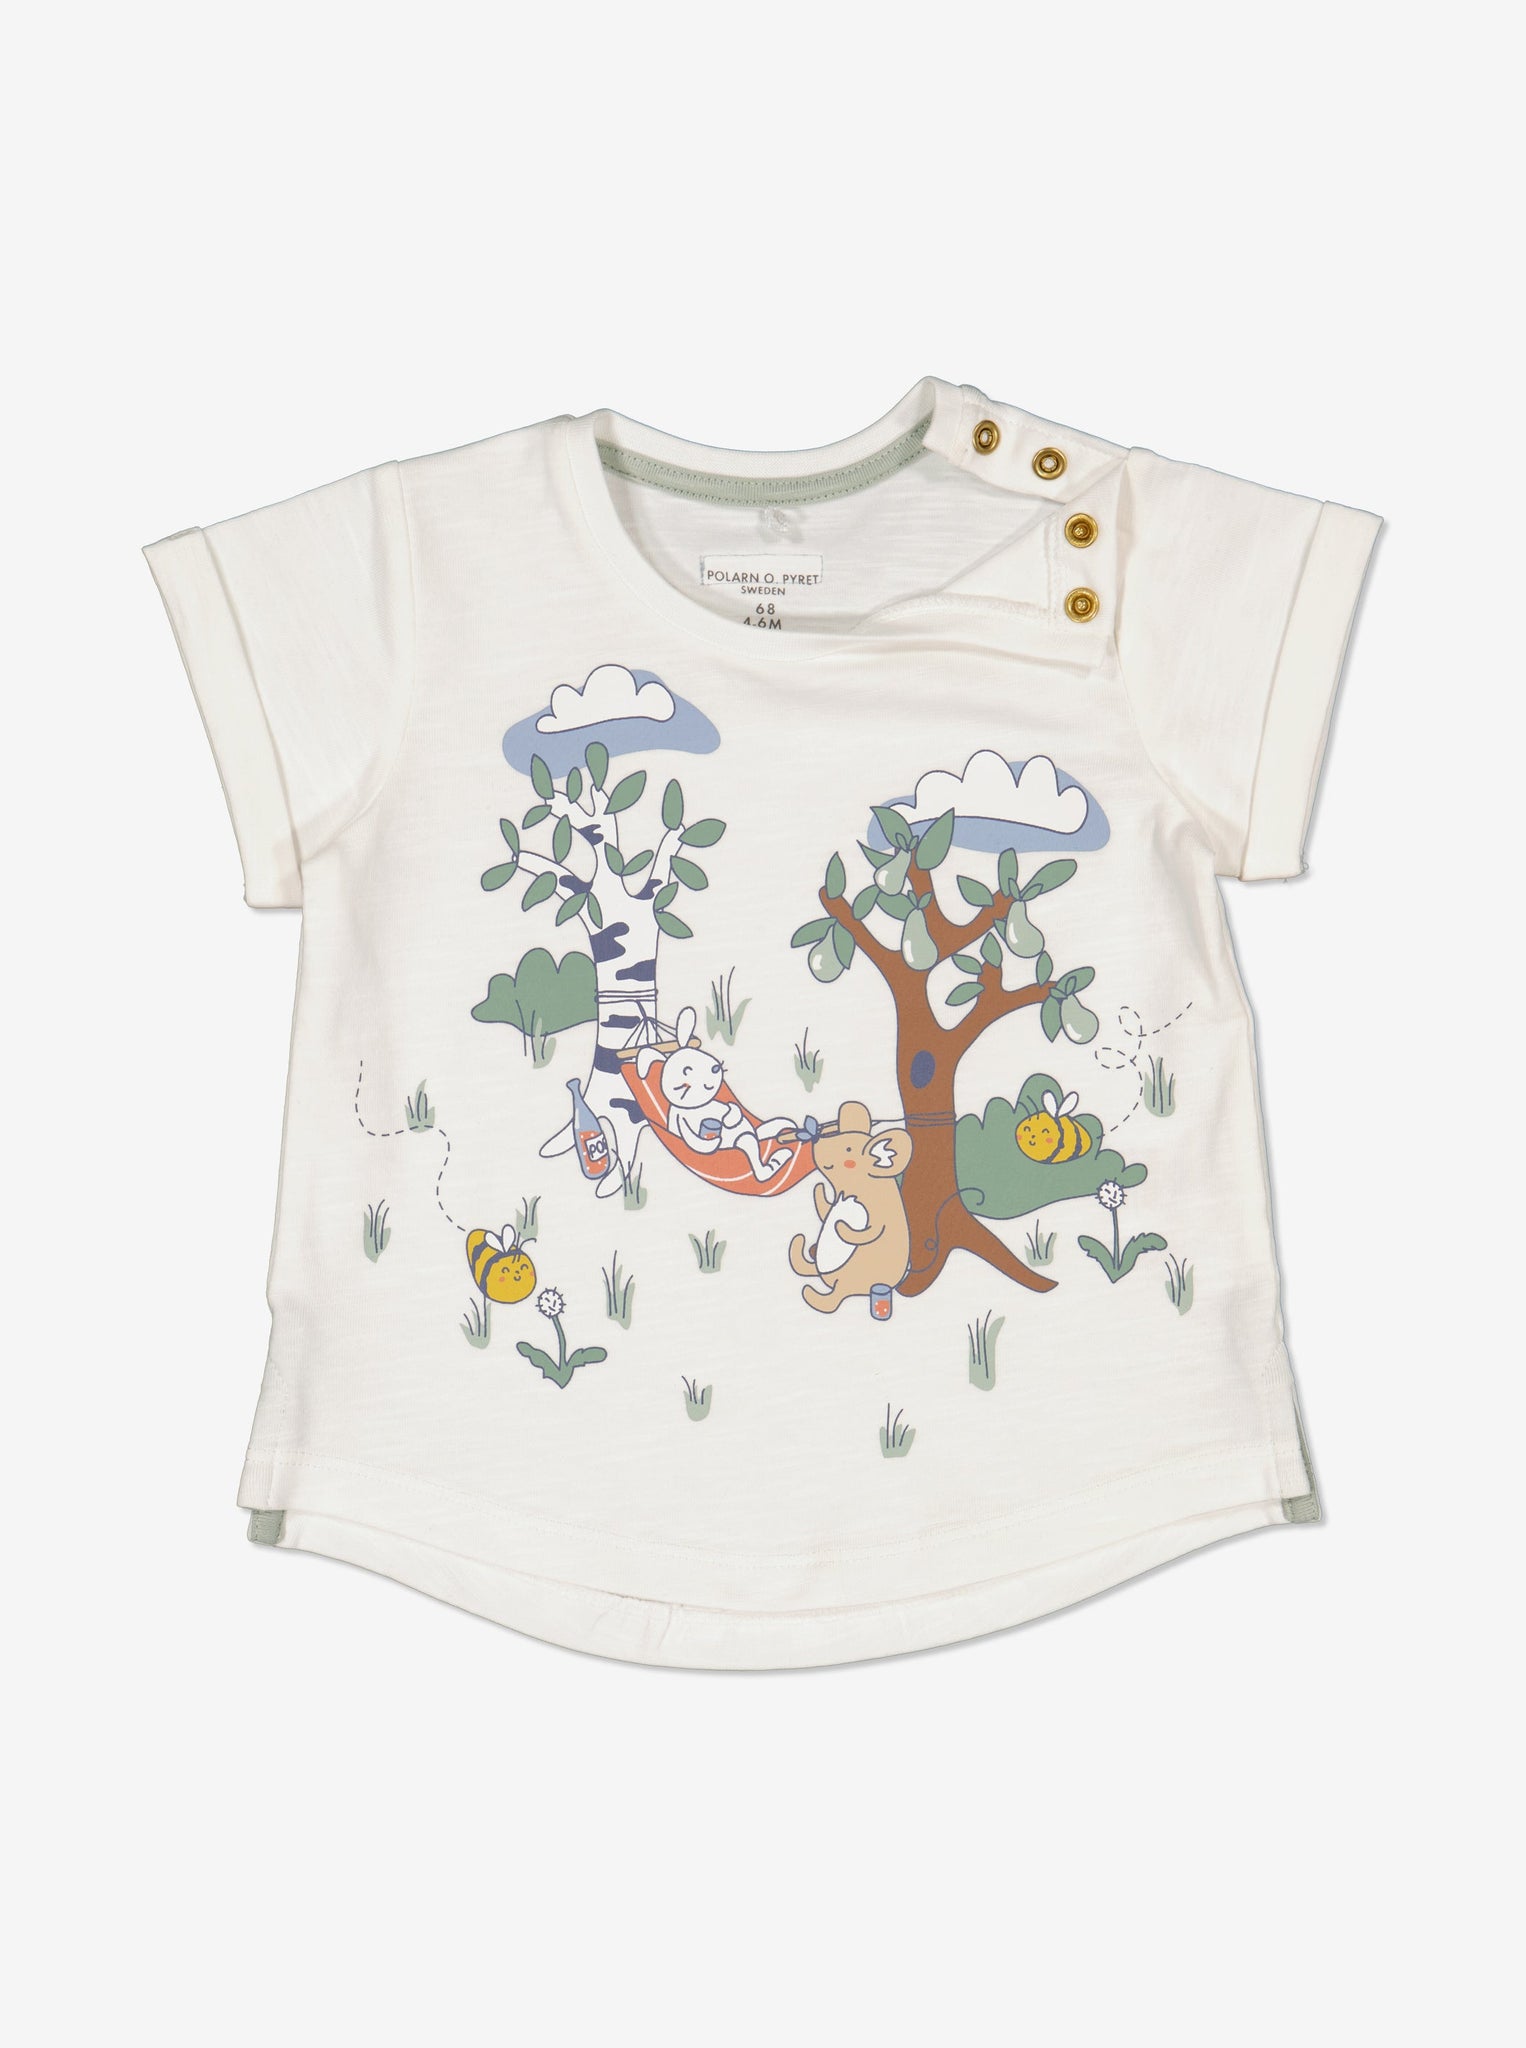 Scandi Wildlife Unisex Baby T-Shirt from Polarn O. Pyret Kidswear. Ethically made and sustainably sourced materials.